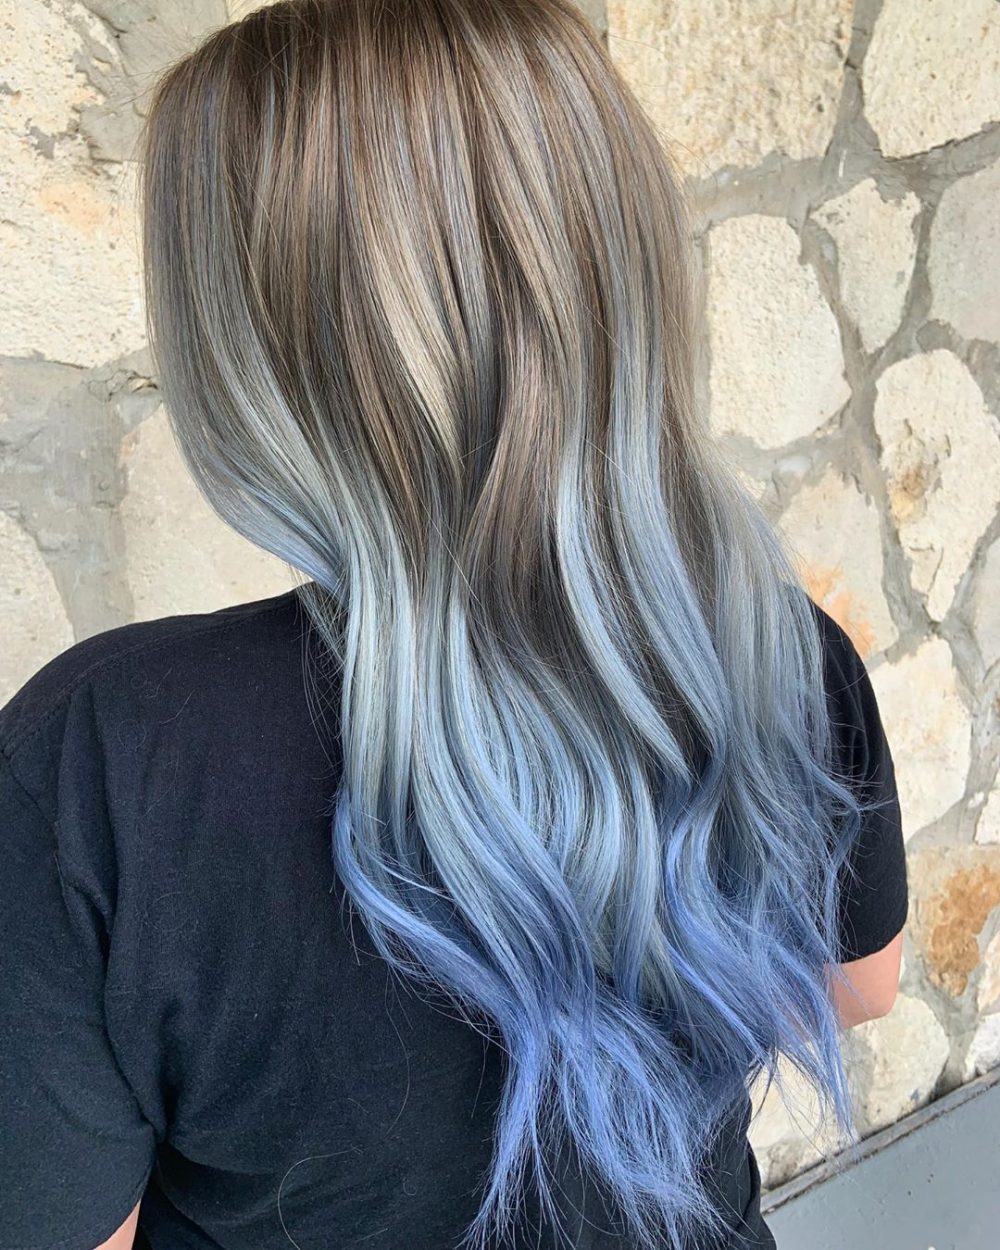 22 Pastel Blue Hair Color Ideas for Every Skin Tone